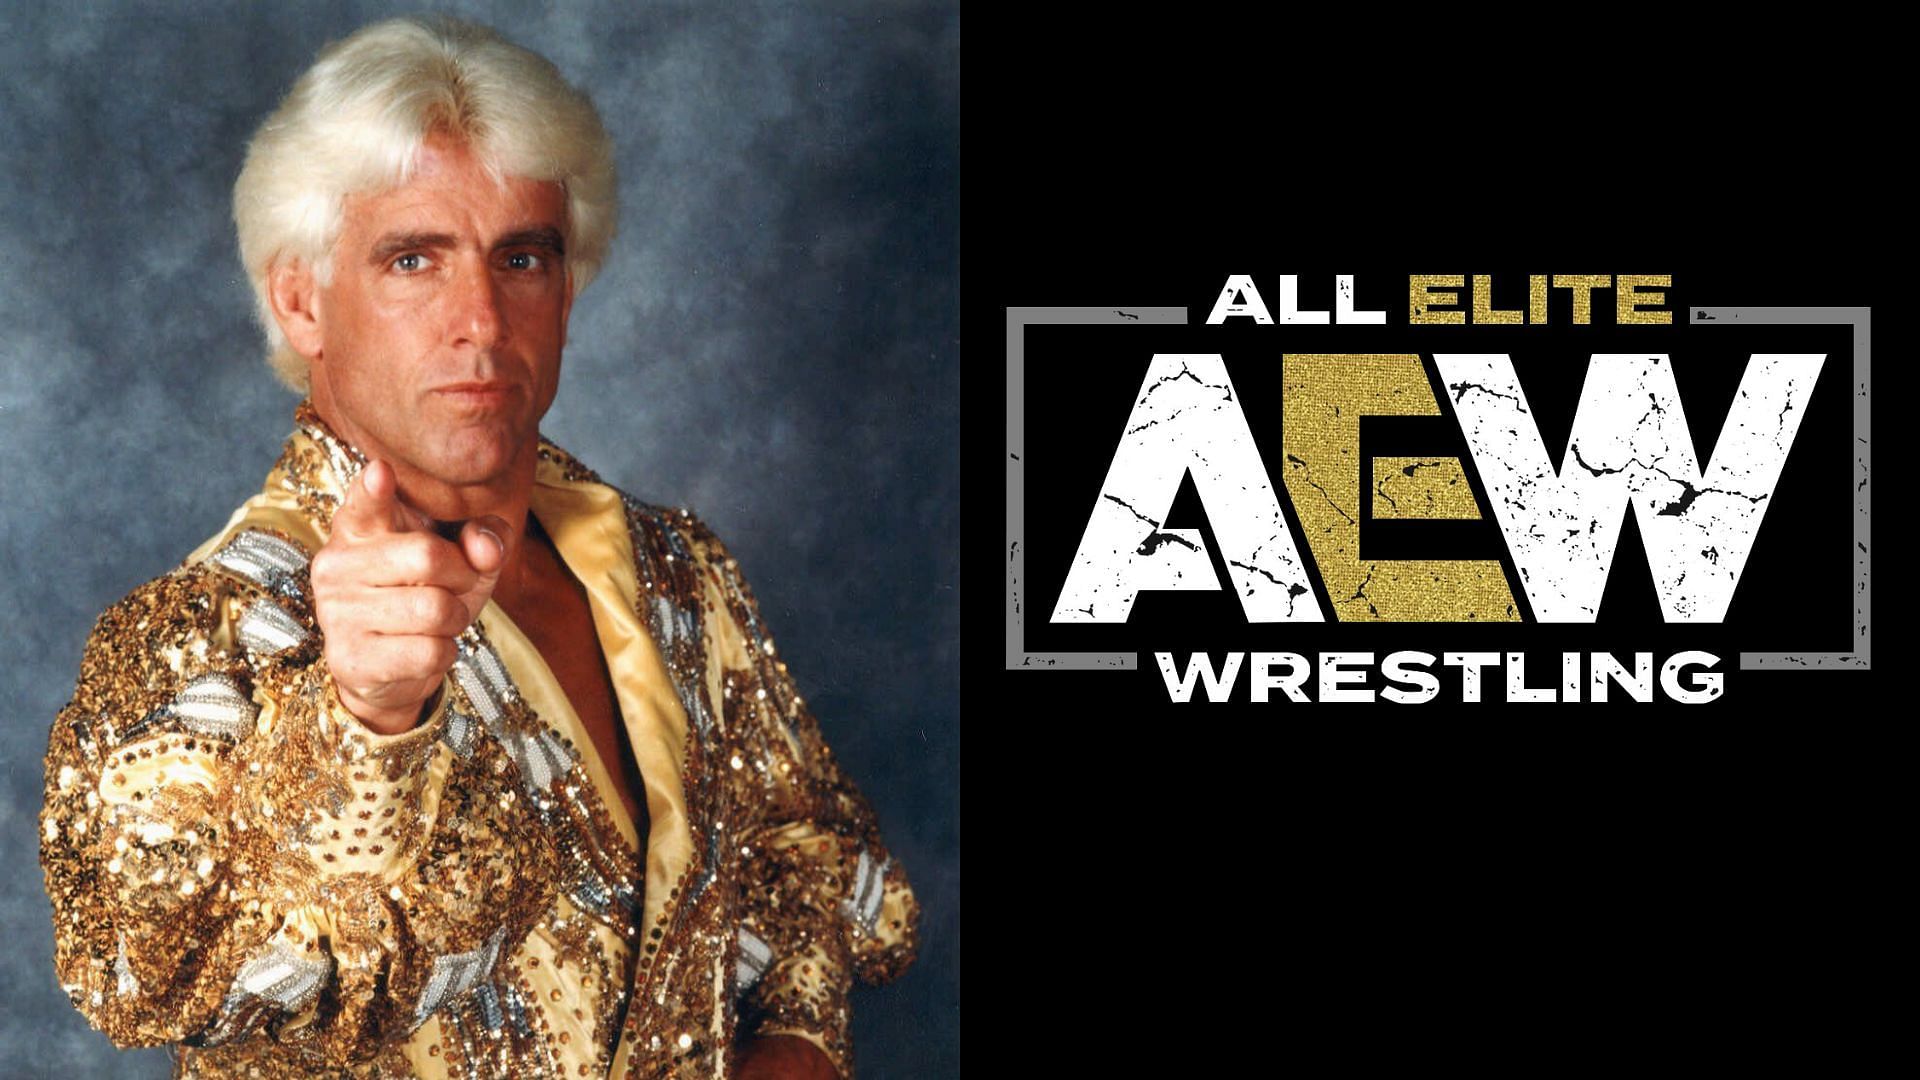 Does Ric Flair believe that this star could make it in AEW?